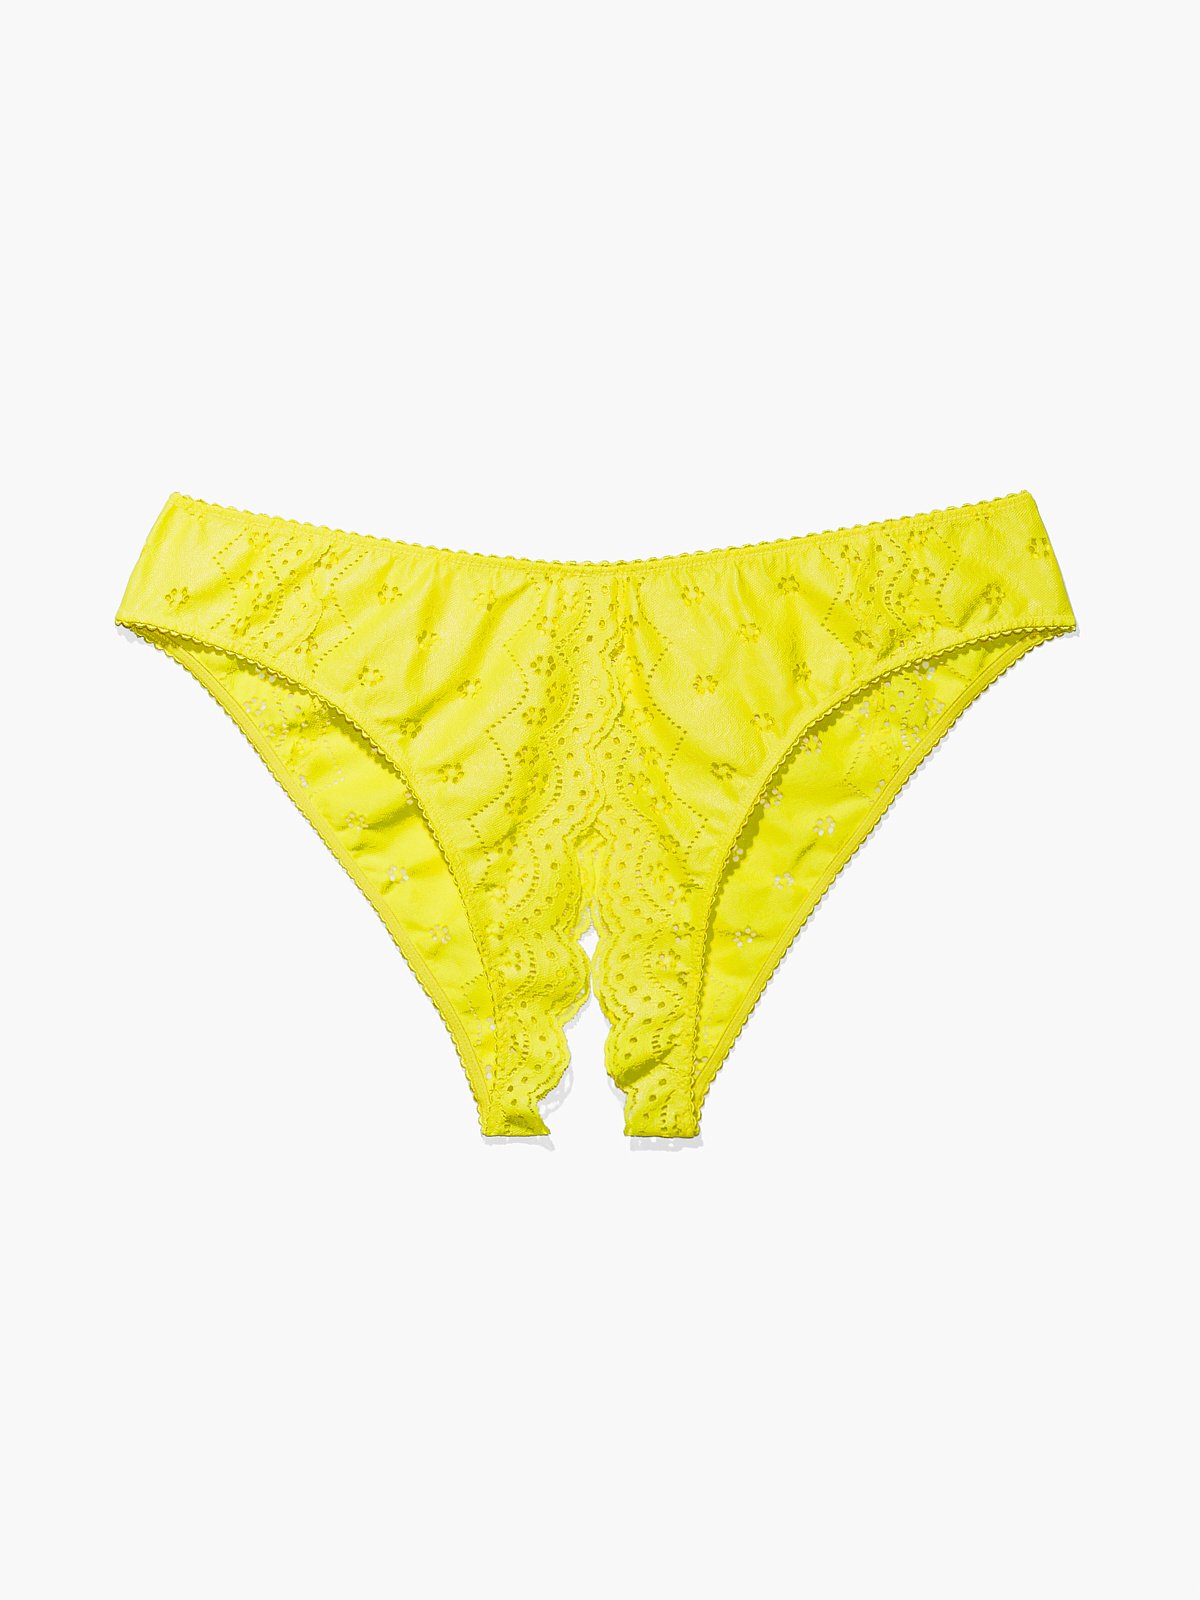 https://cdn.savagex.com/media/images/products/UD2147026-9047/BOMBSHELL-BRODERIE-CROTCHLESS-LACE-UNDIE-UD2147026-9047-LAYDOWN-1200x1600.jpg